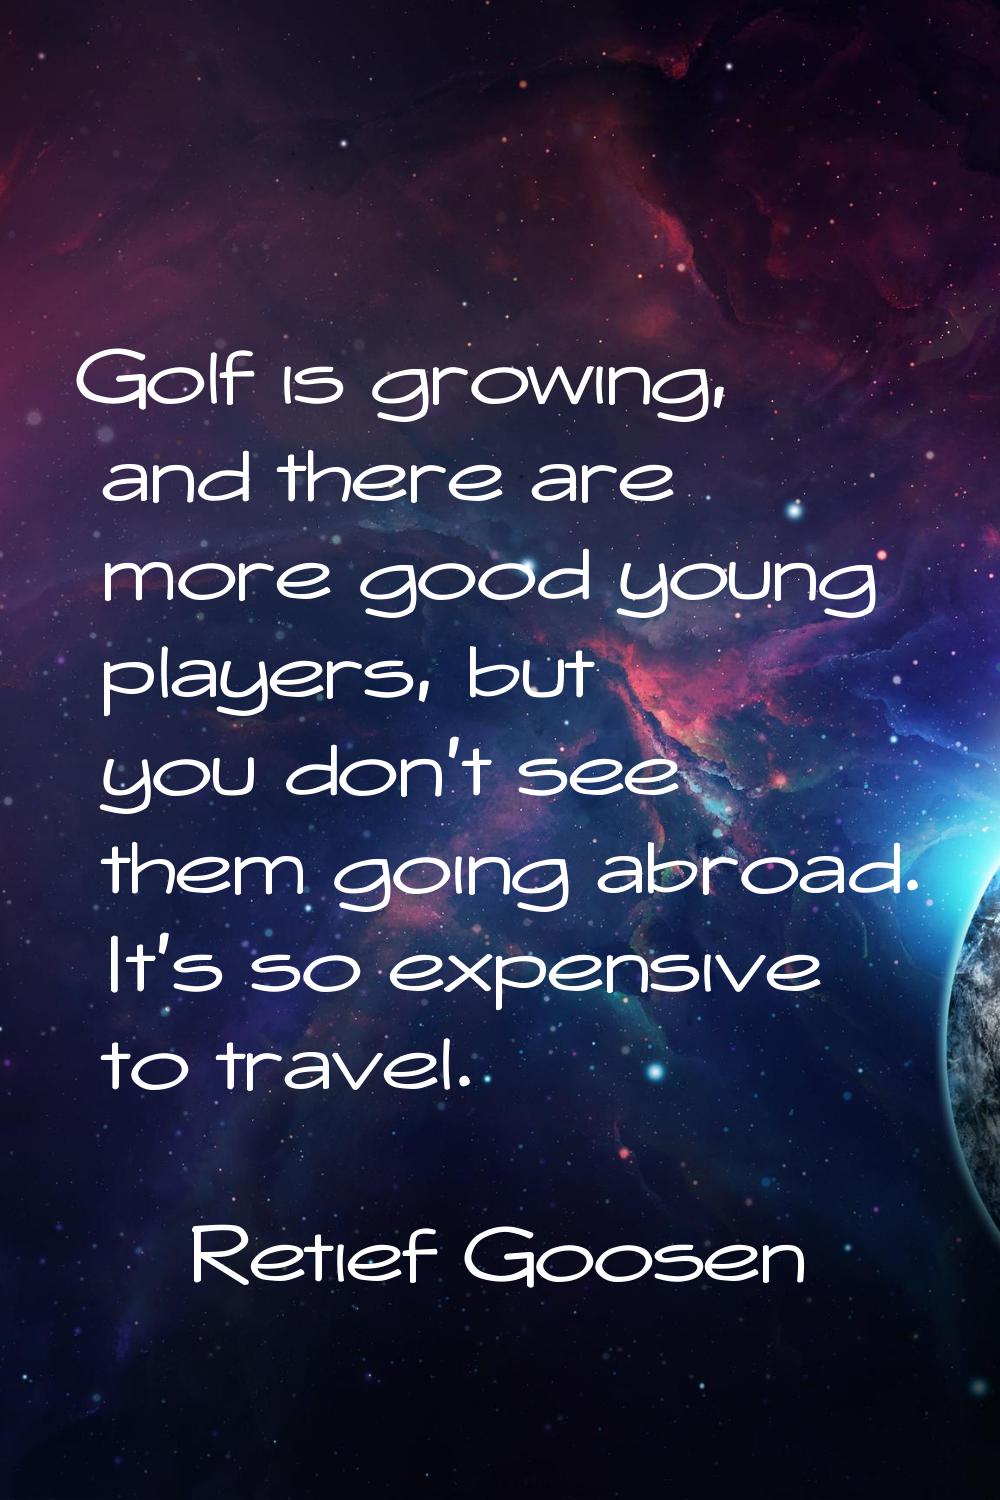 Golf is growing, and there are more good young players, but you don't see them going abroad. It's s